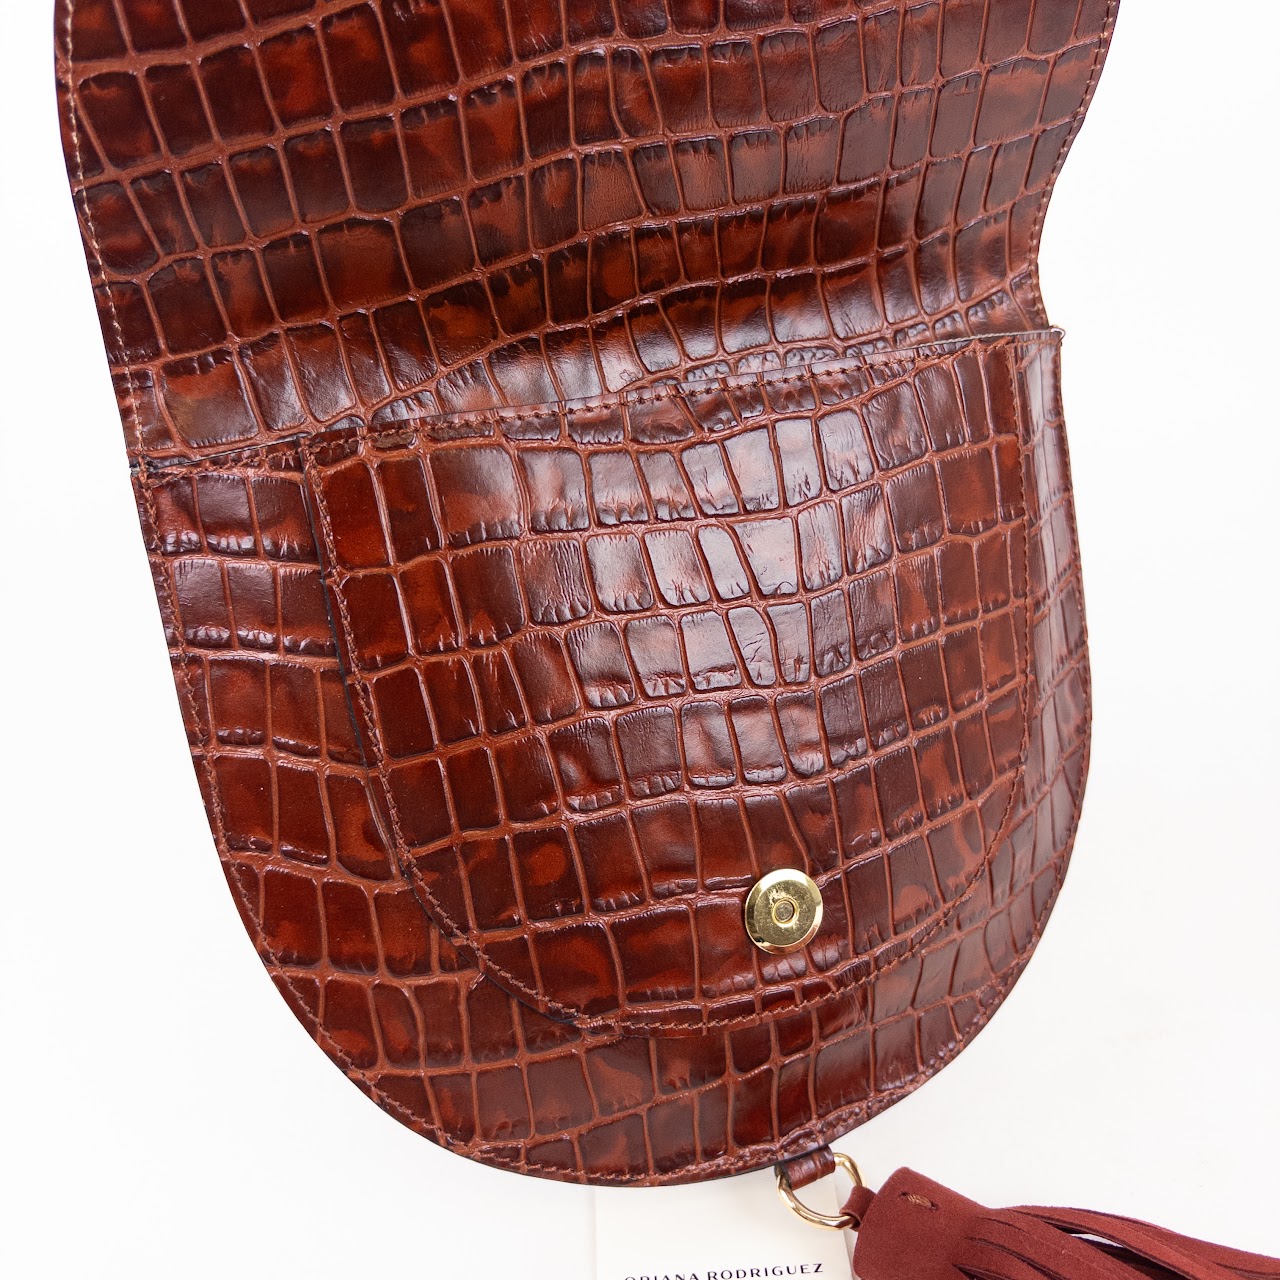 Oriana Rodriguez Embossed Leather Clutch